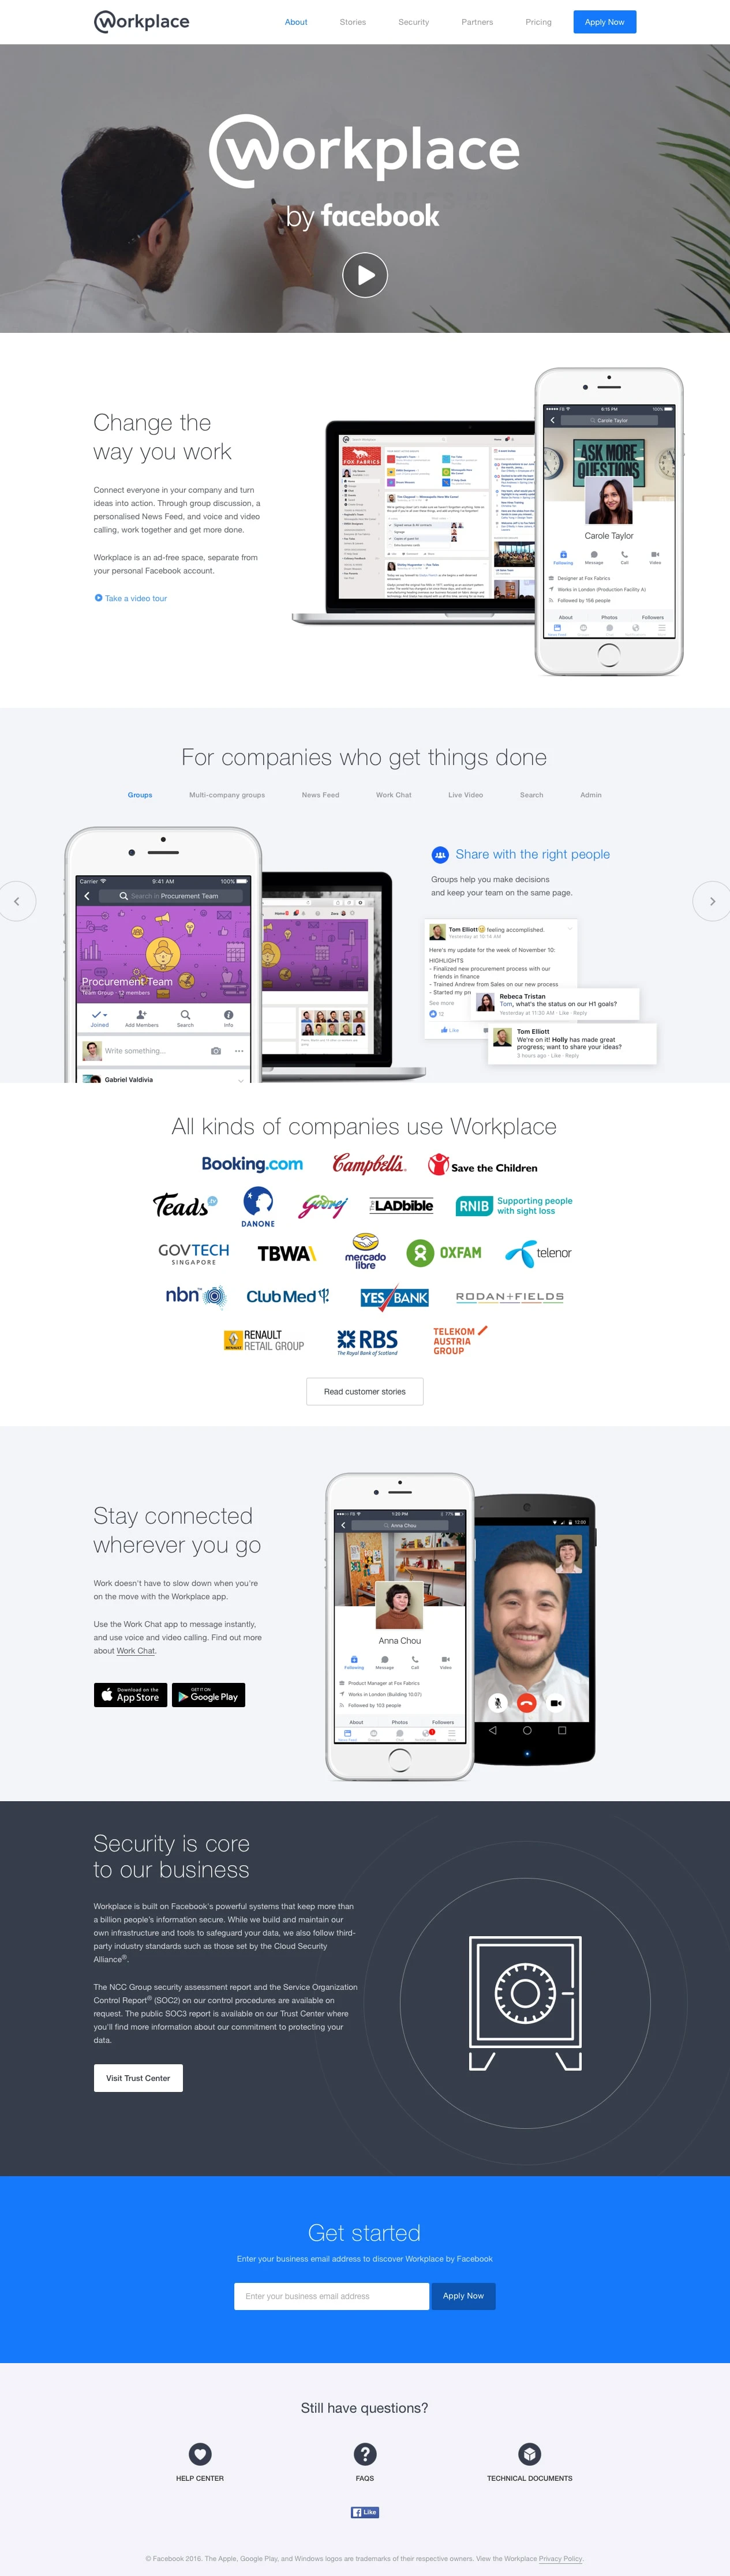 Workplace by Facebook Landing Page Example: For companies who get things done. Collaborate and get more done.